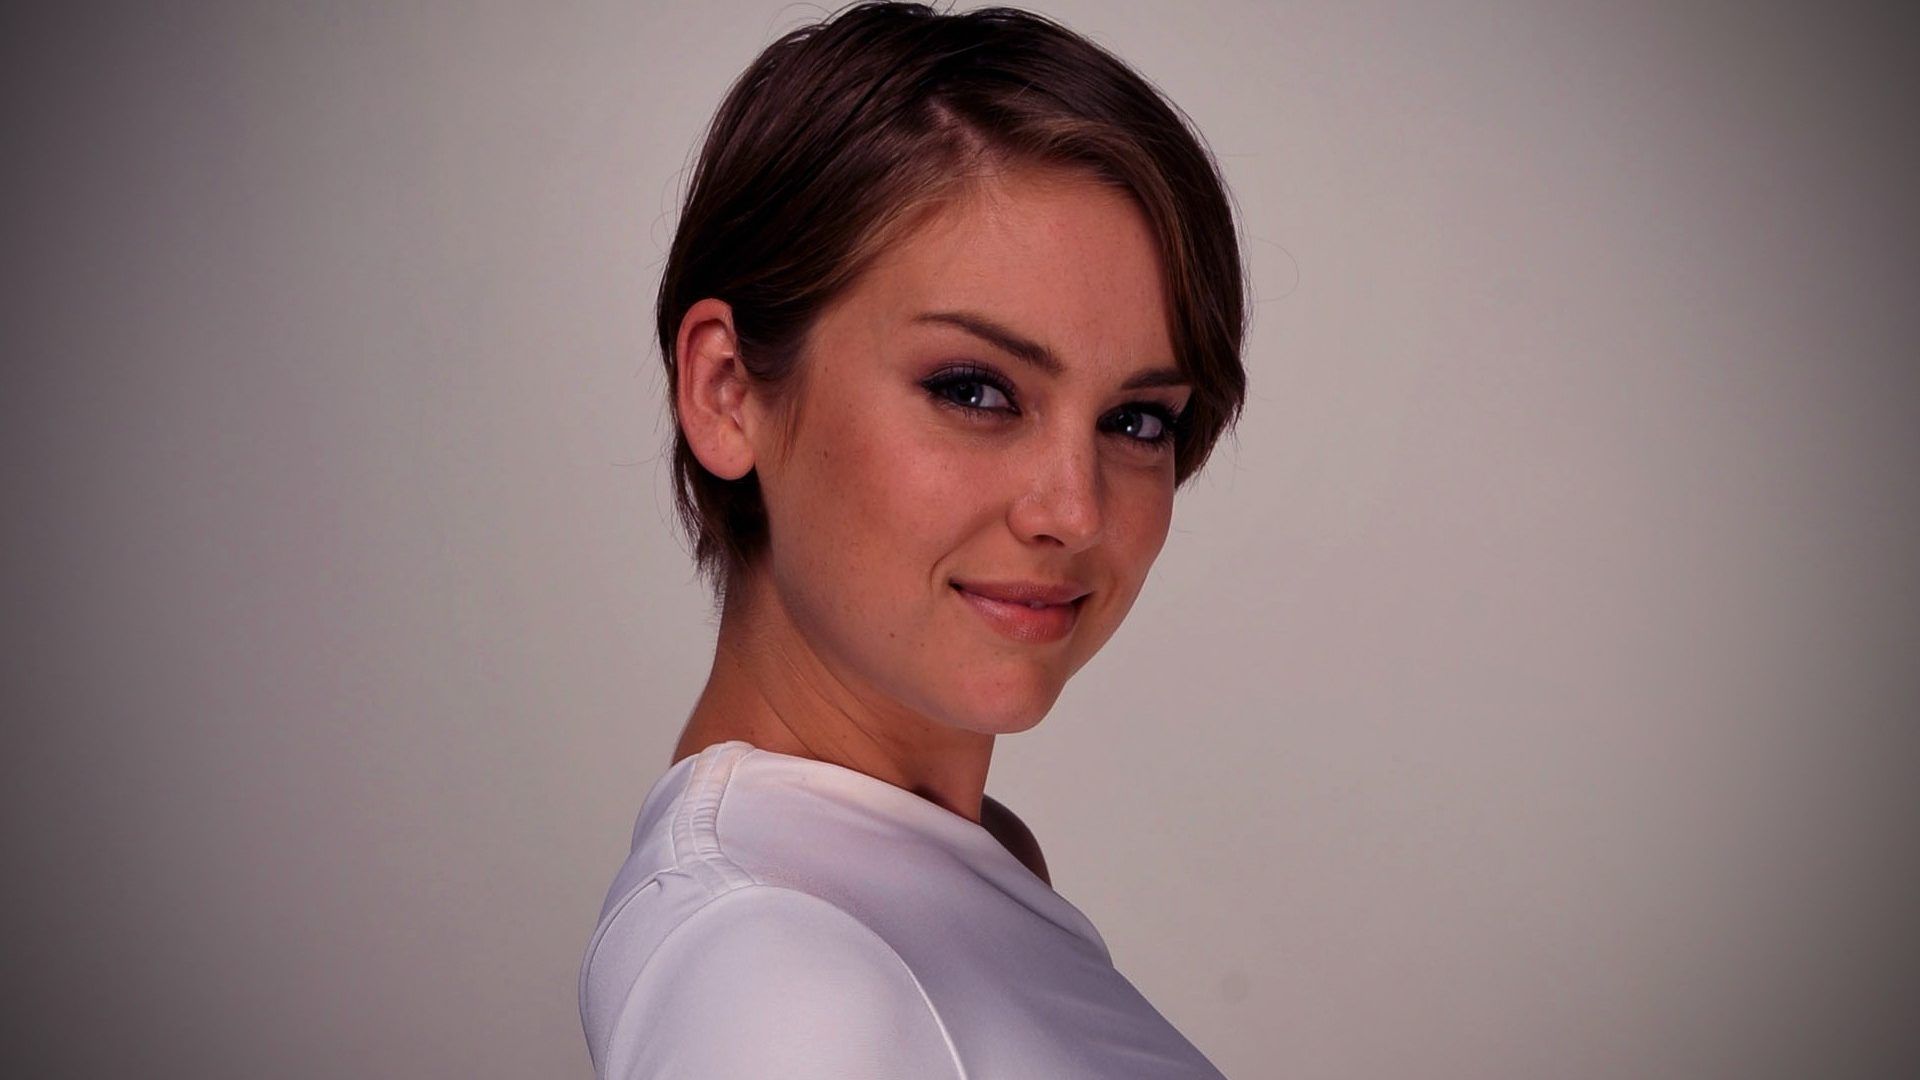 Best Perfect Nose Images On Pinterest Hair Cut Make Beautiful Regarding 2018 Jessica Stroup Pixie Hairstyles (View 5 of 15)